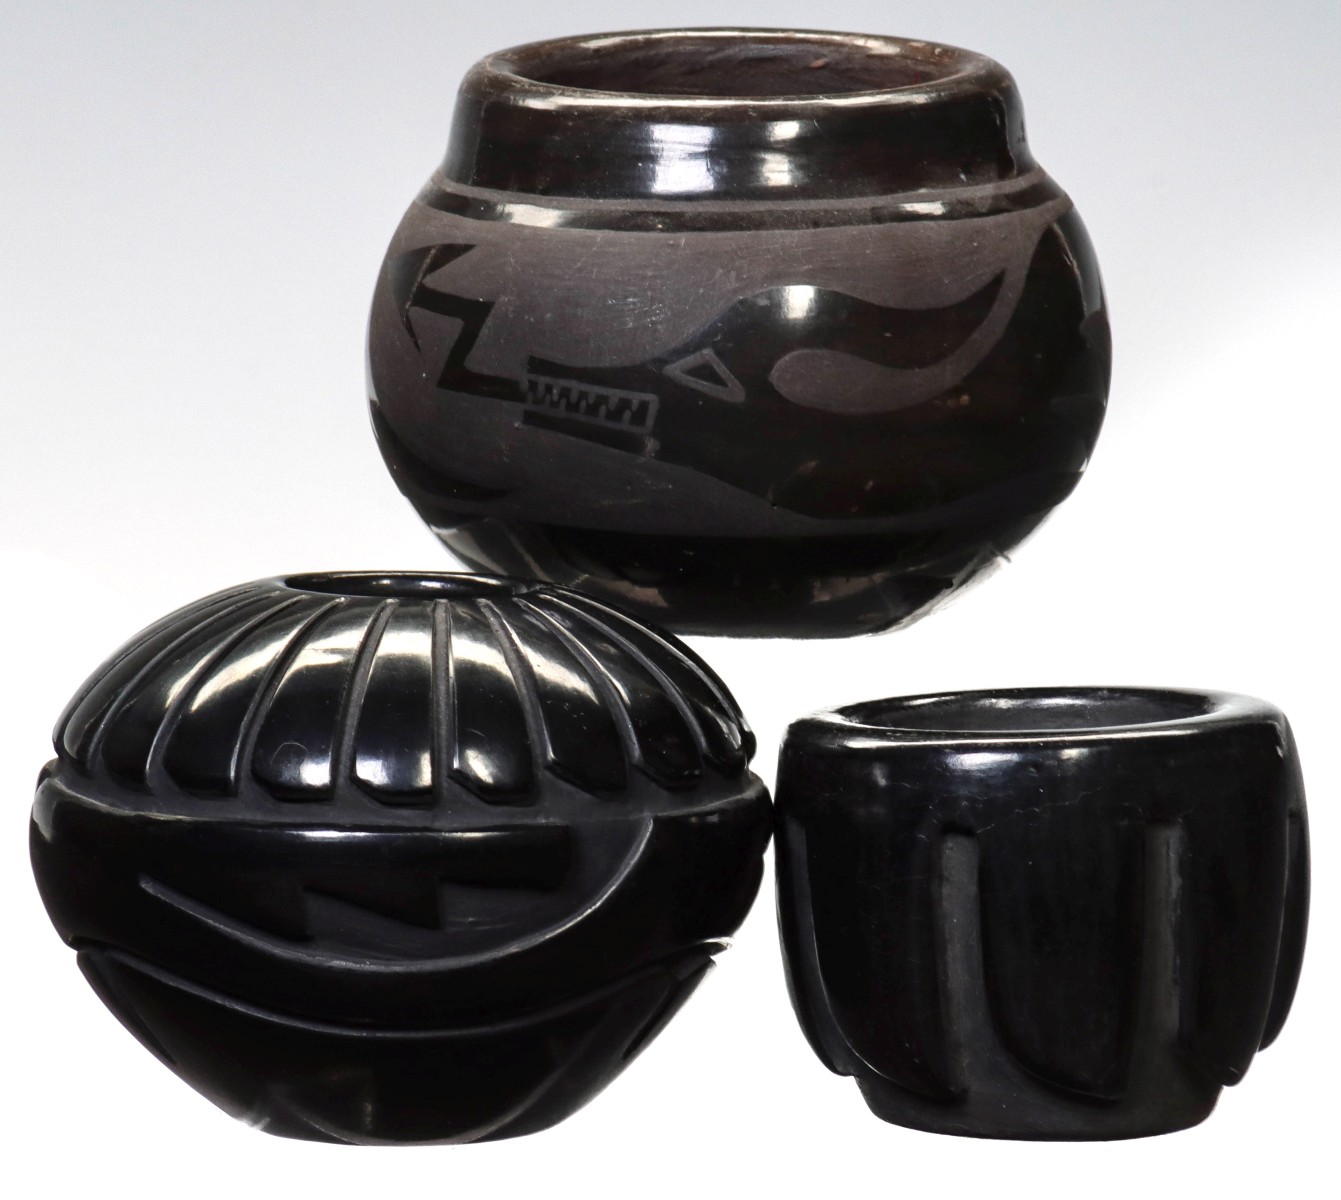 THREE PIECES CARVED AND POLISHED SANTA CLARA POTTERY